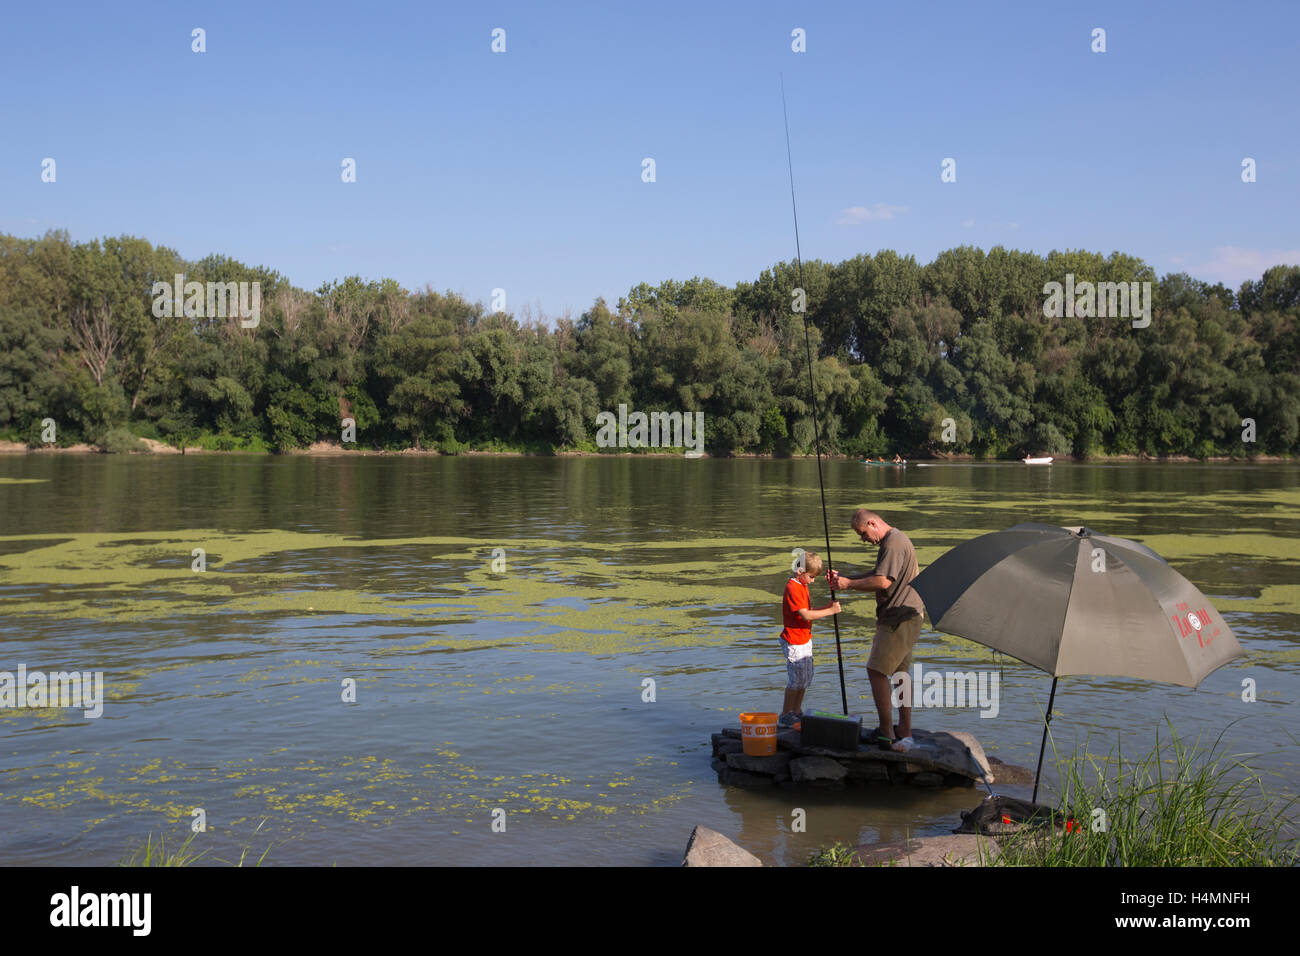 People fishing on the banks of the River Tisza, one of the main rivers in Central Europe which runs through Szeged, Hungary Stock Photo